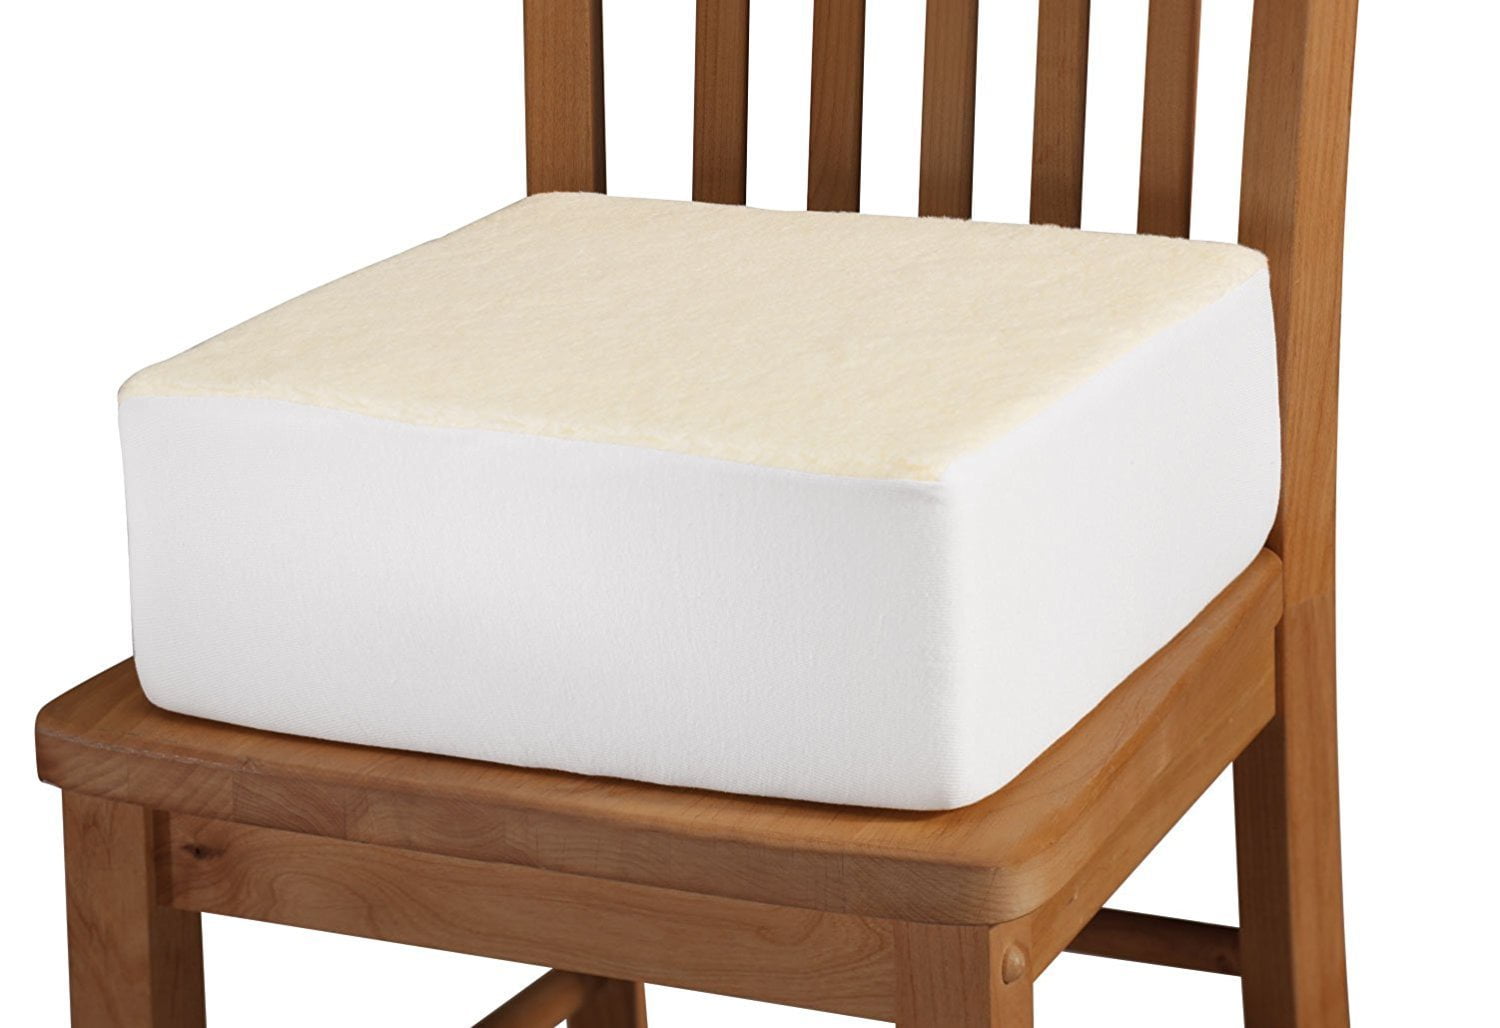 foam mattress 7 or 8 inches thick